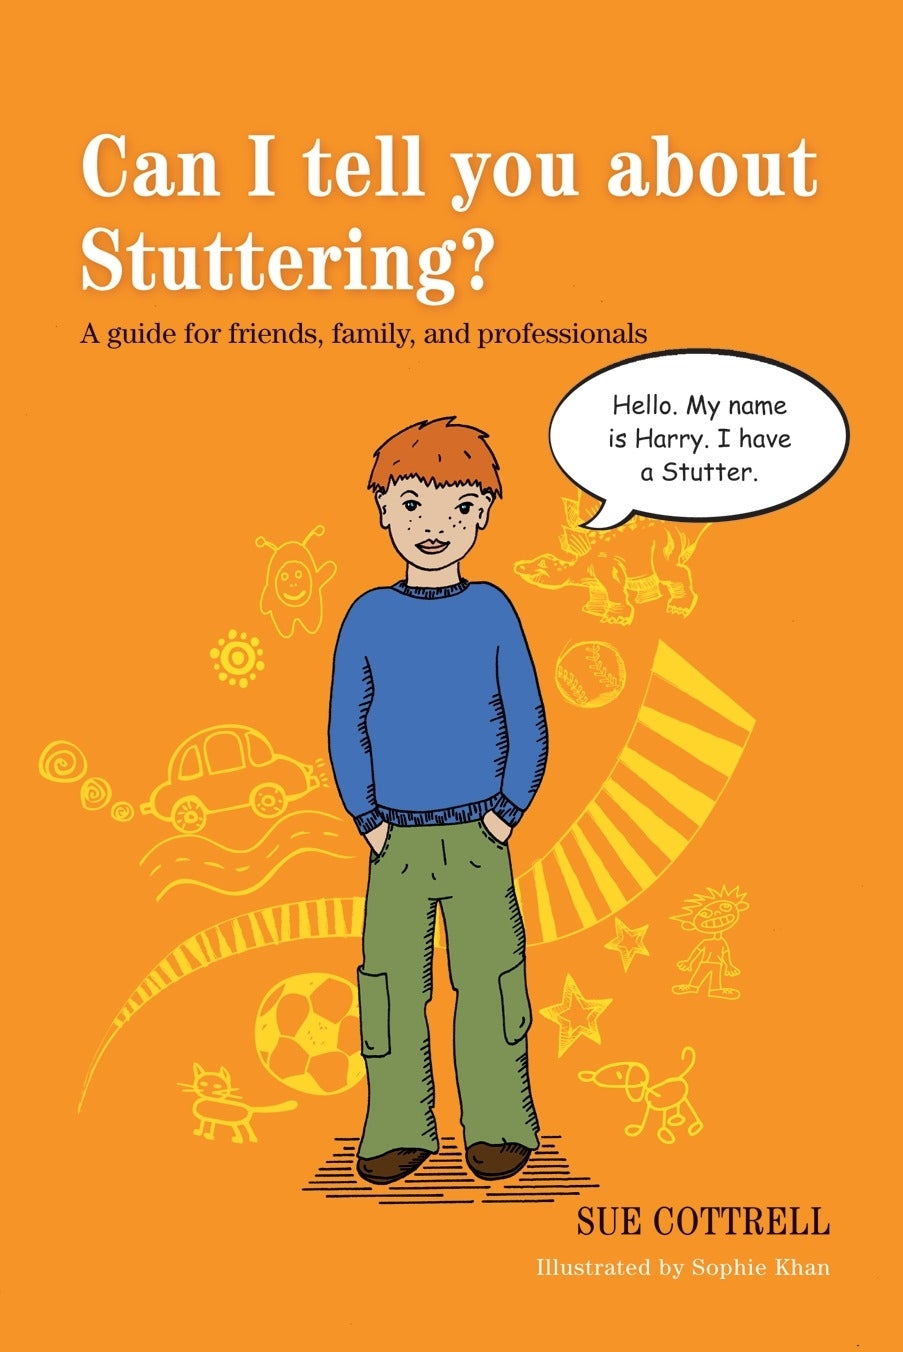 Can I tell you about Stuttering? by Sophie Khan, Sue Cottrell